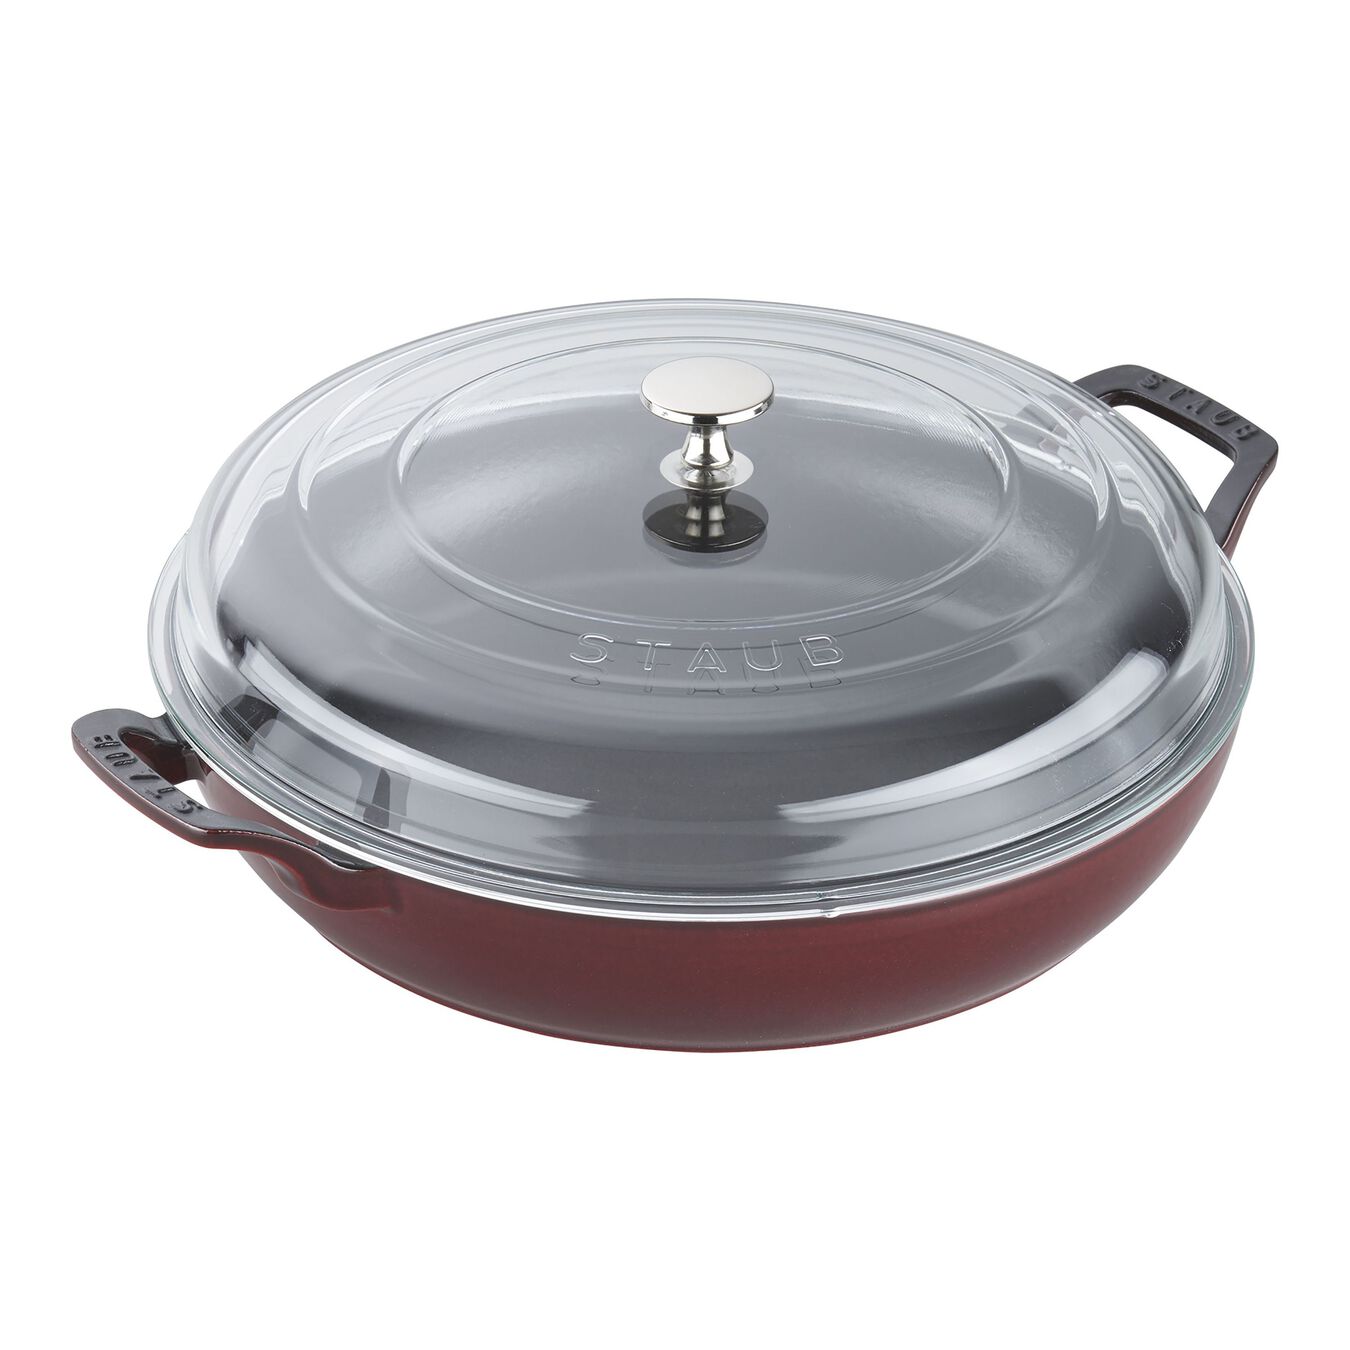 3.5 l cast iron round Saute pan with glass lid, grenadine-red - Visual Imperfections,,large 1